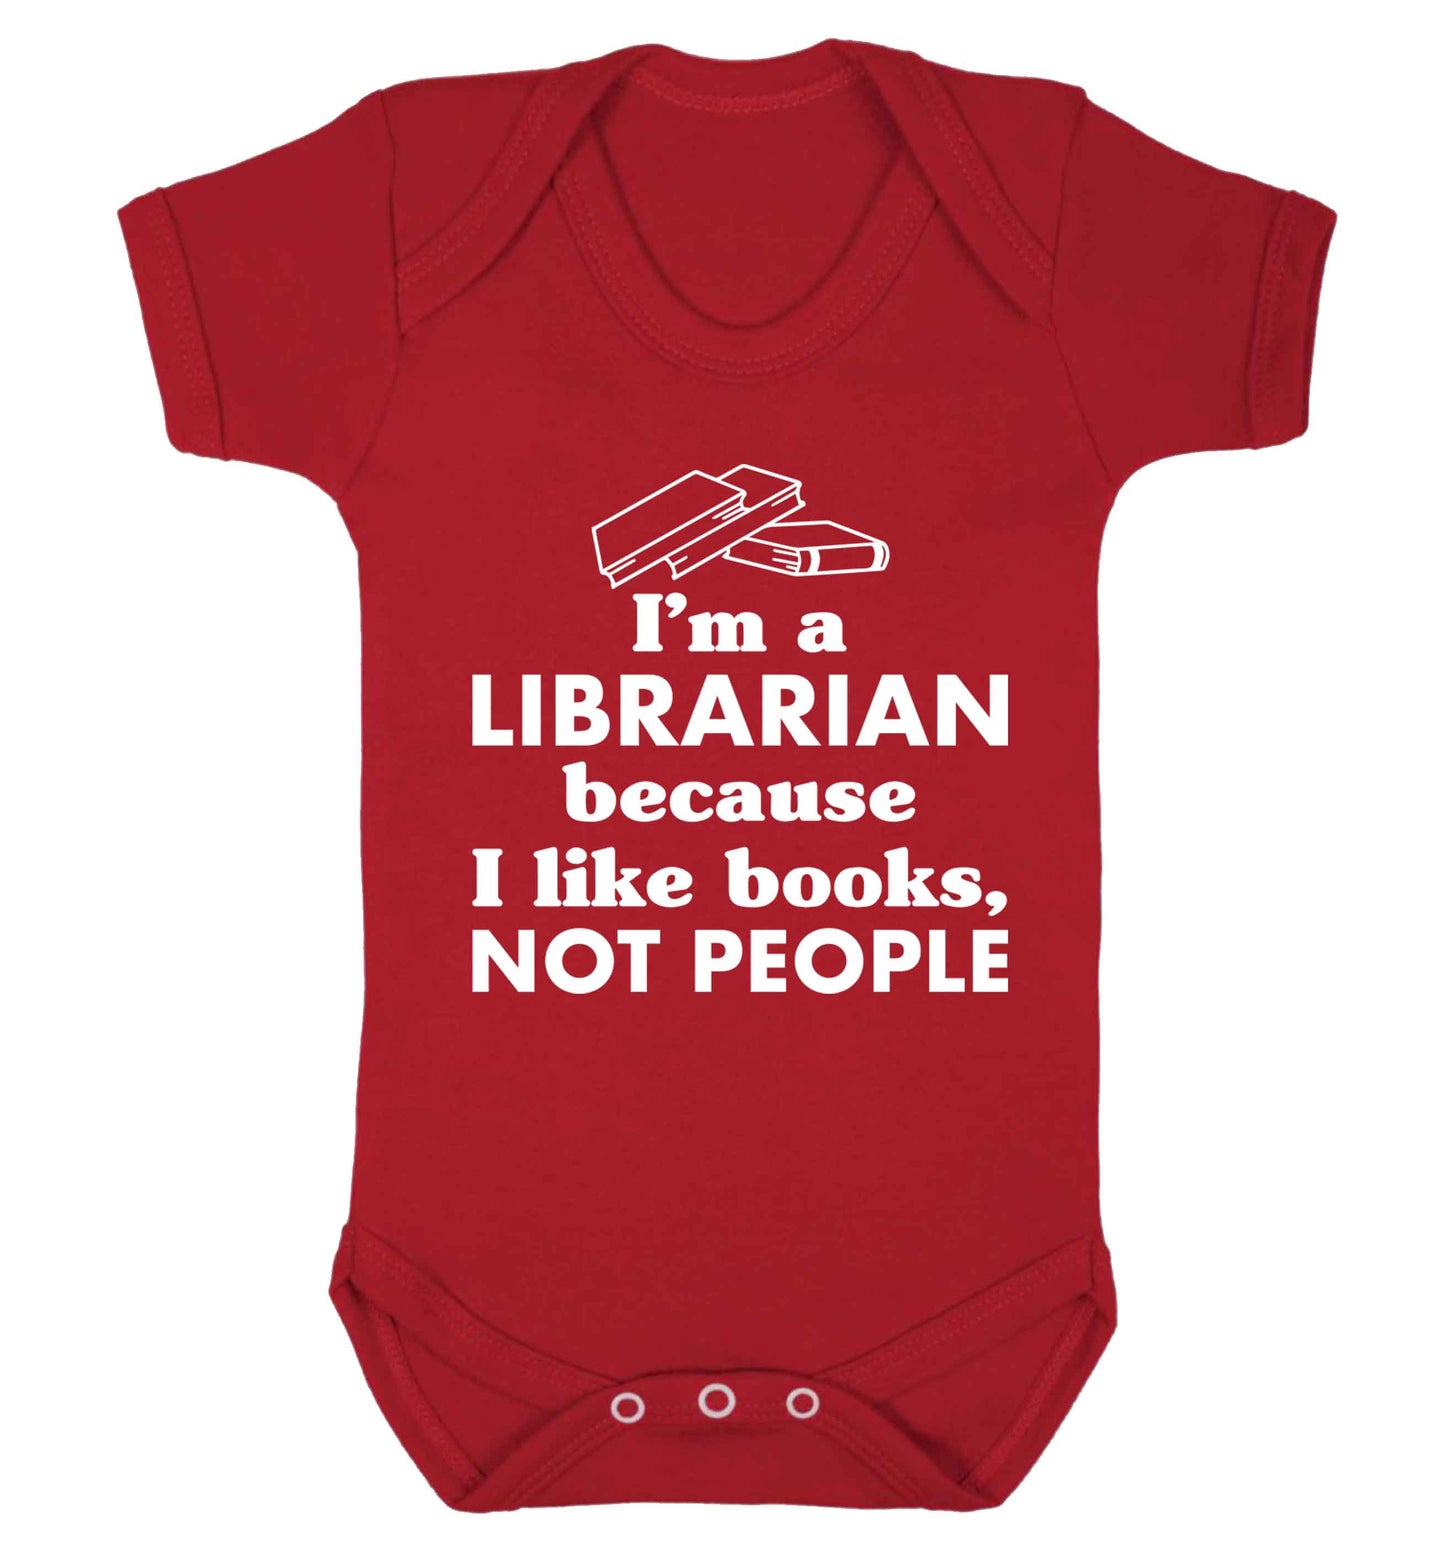 I'm a librarian because I like books not people Baby Vest red 18-24 months